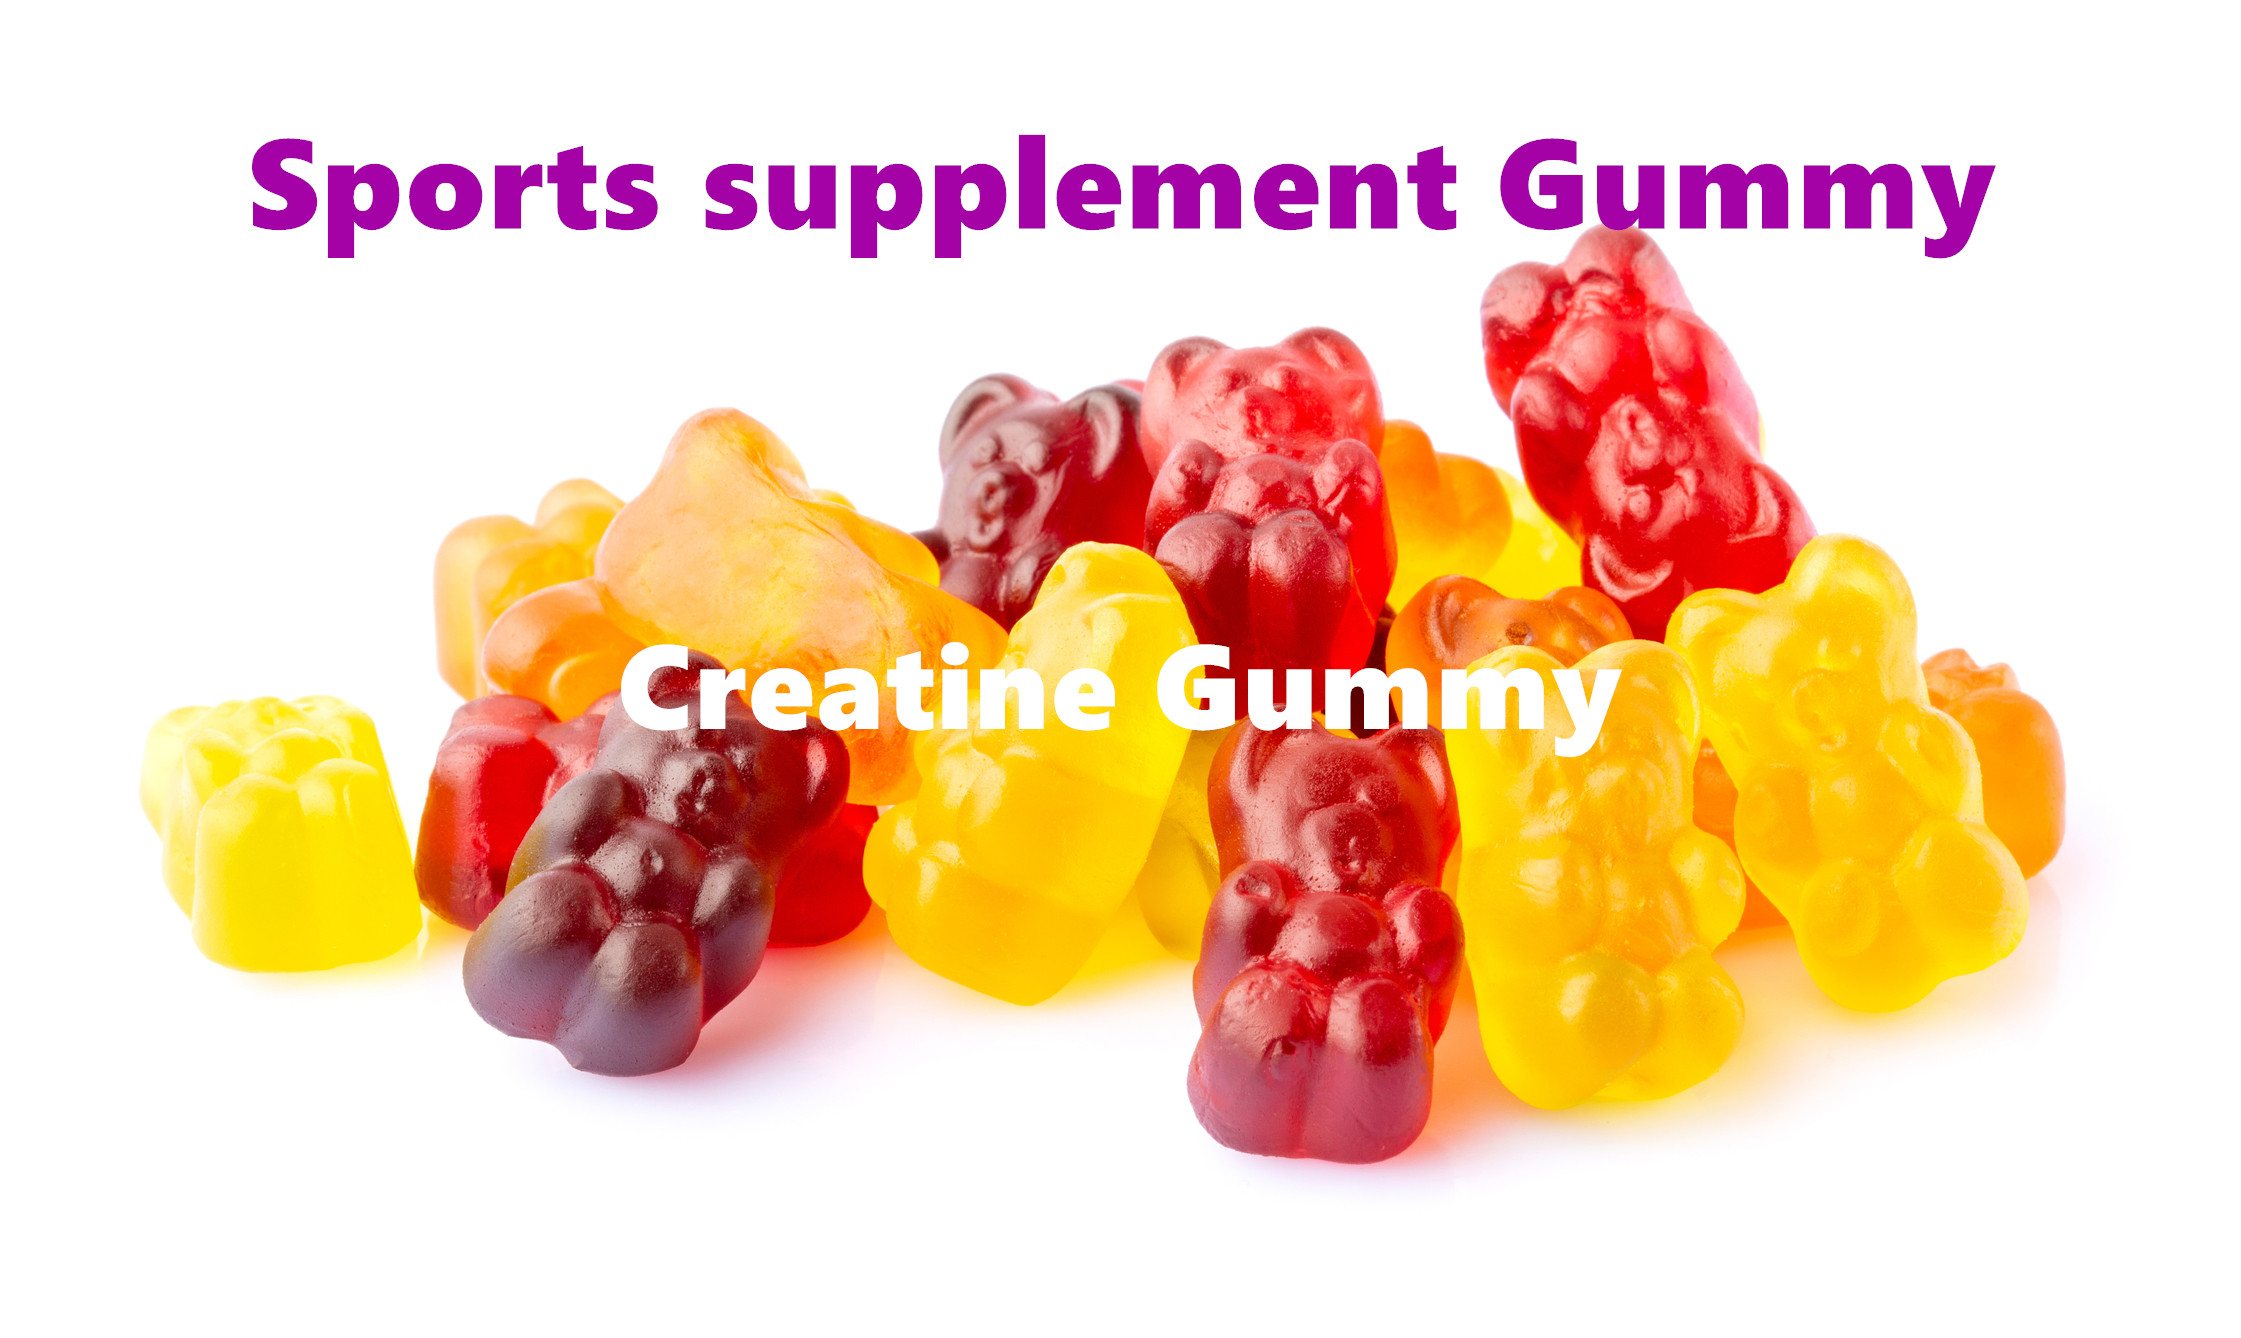 Creatine Gummies – The Convenient and Effective Way to Boost Athletic Performance and Muscle Growth!